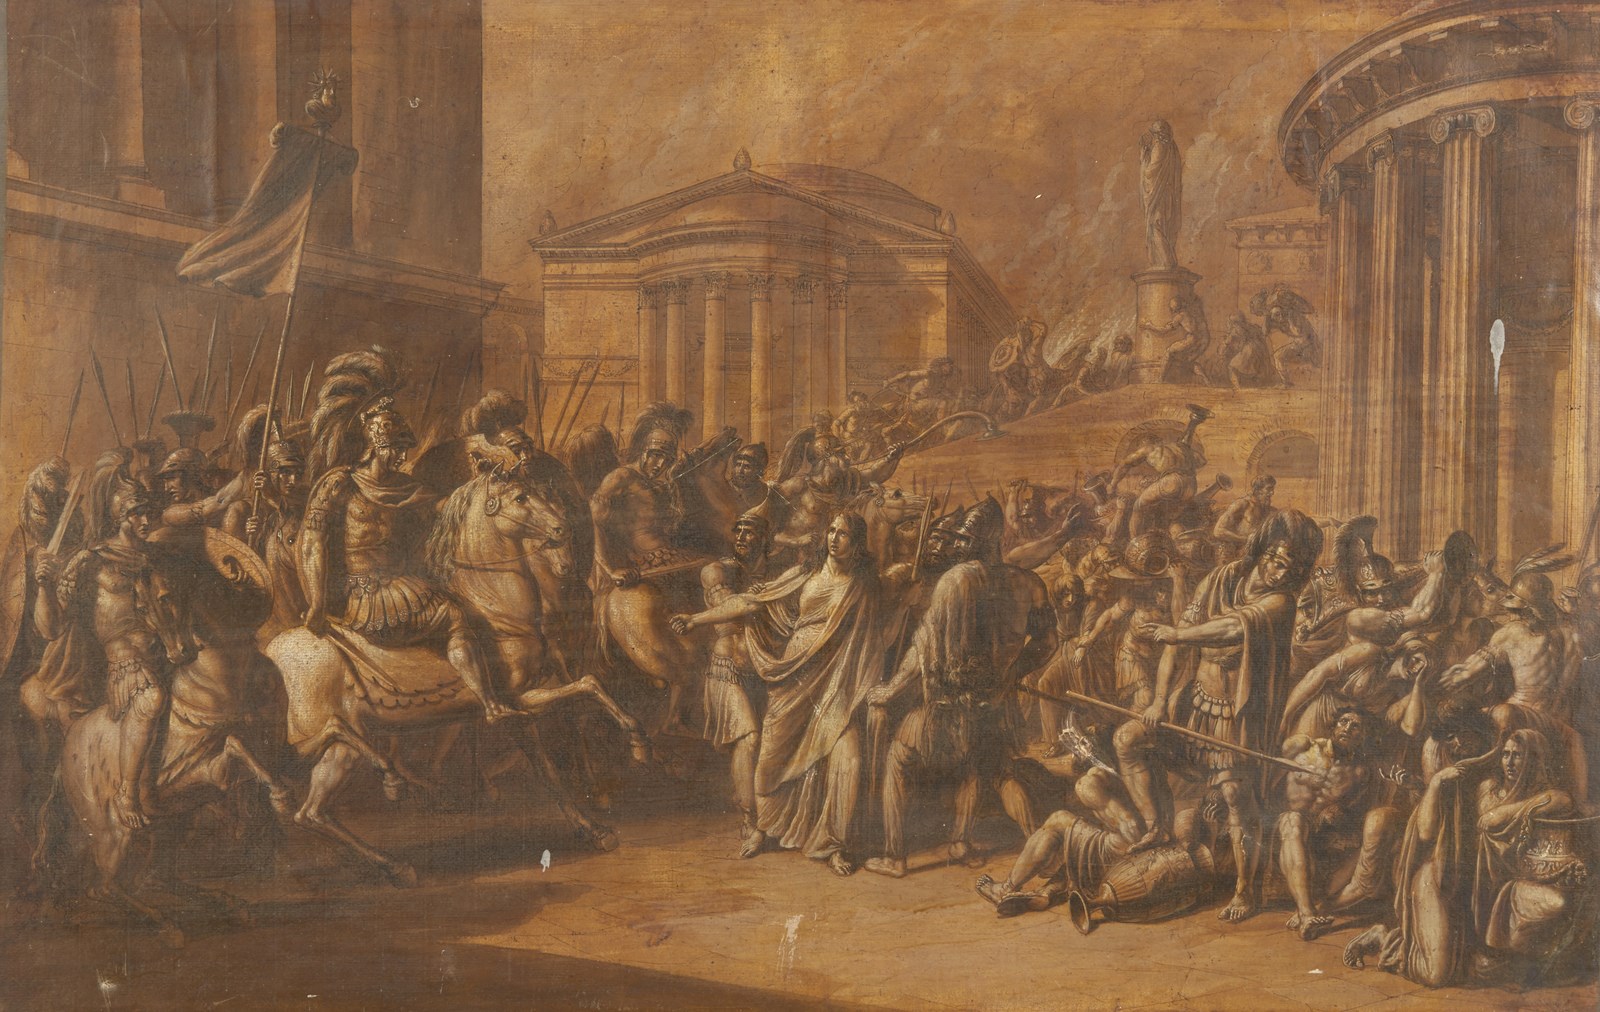 Attributed to. Timothy the Theban matron in the capture of Thebes (Giuseppe Sabatelli)